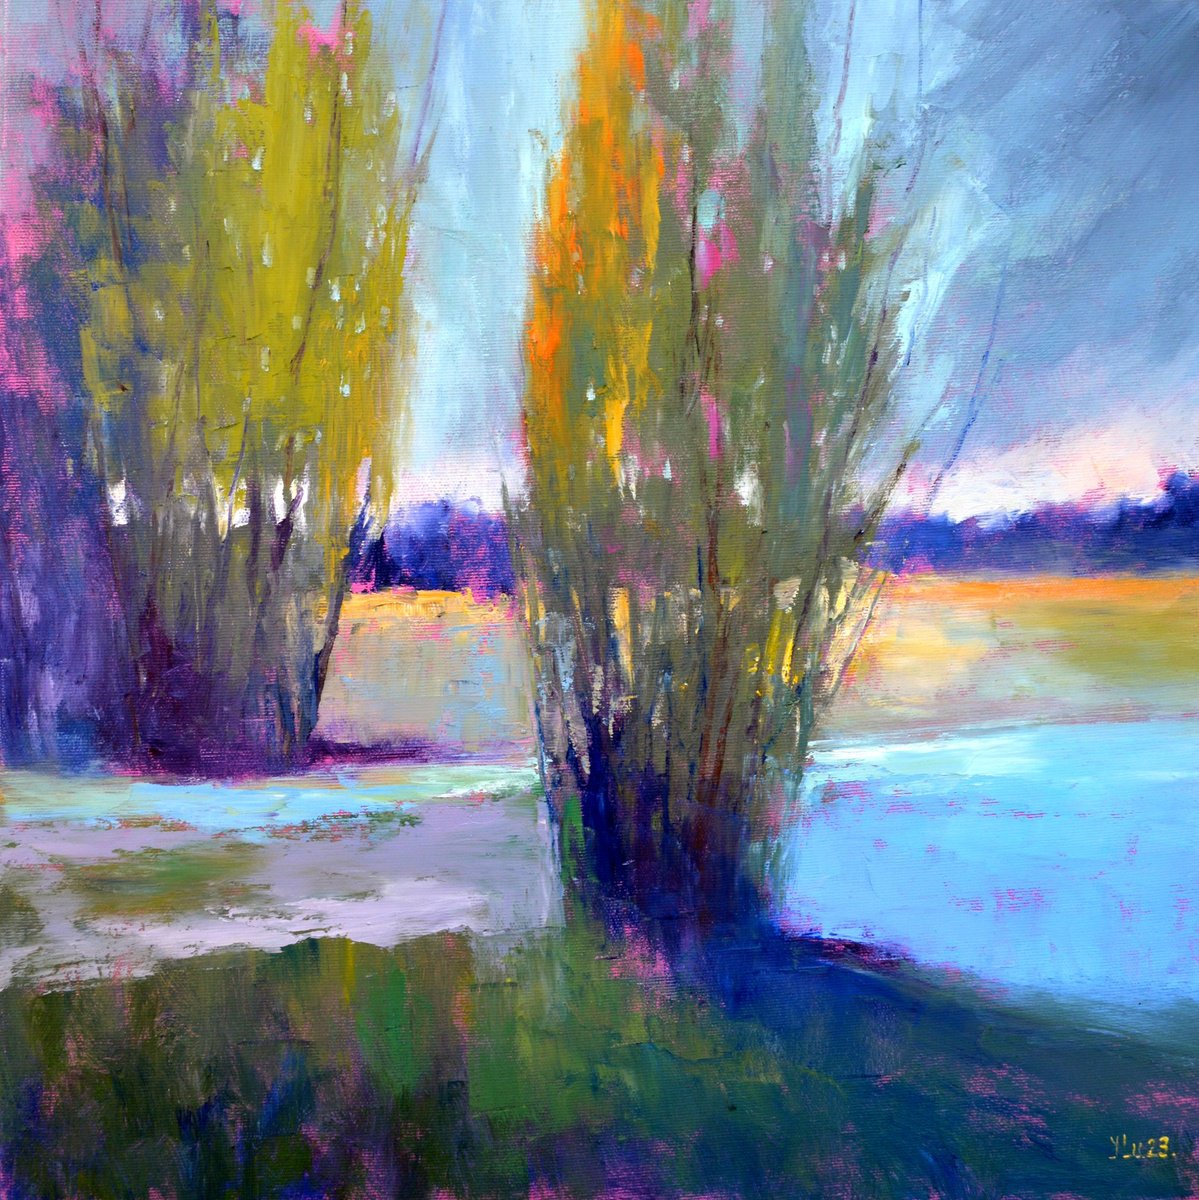 Evening colors by the river by Elena Lukina